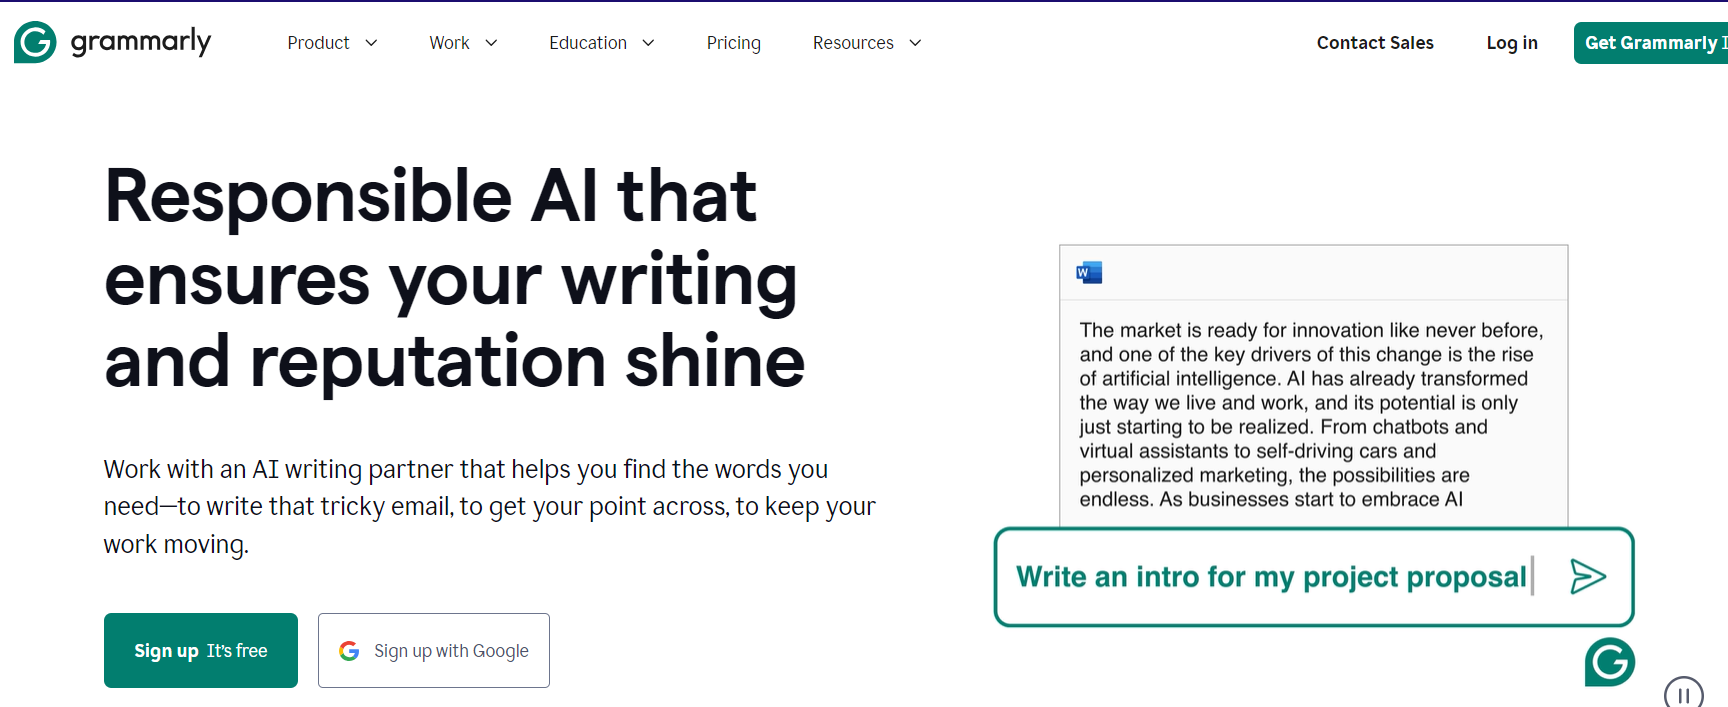 Grammarly homepage - one of the best AI productivity tools for content creators.